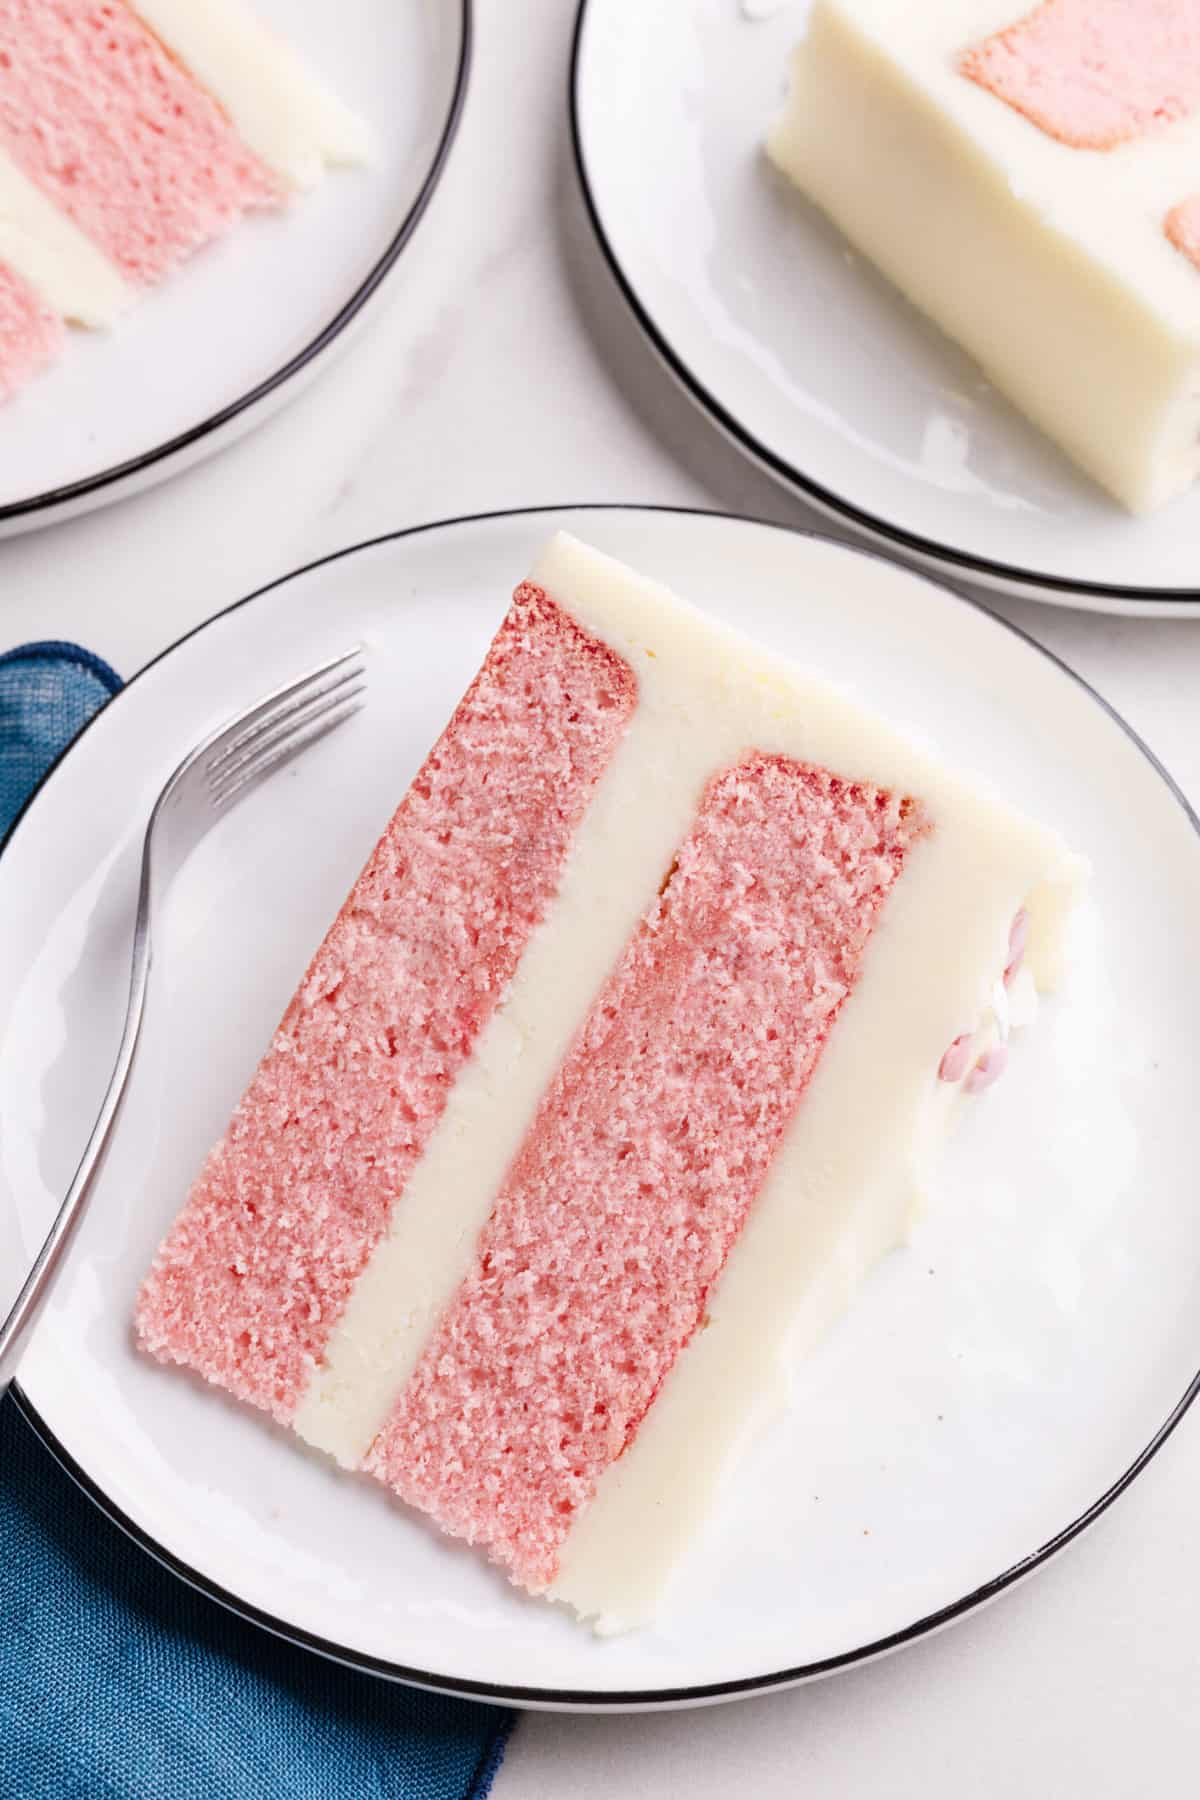 top down image of a slice of pink velvet cake served on a white round plate